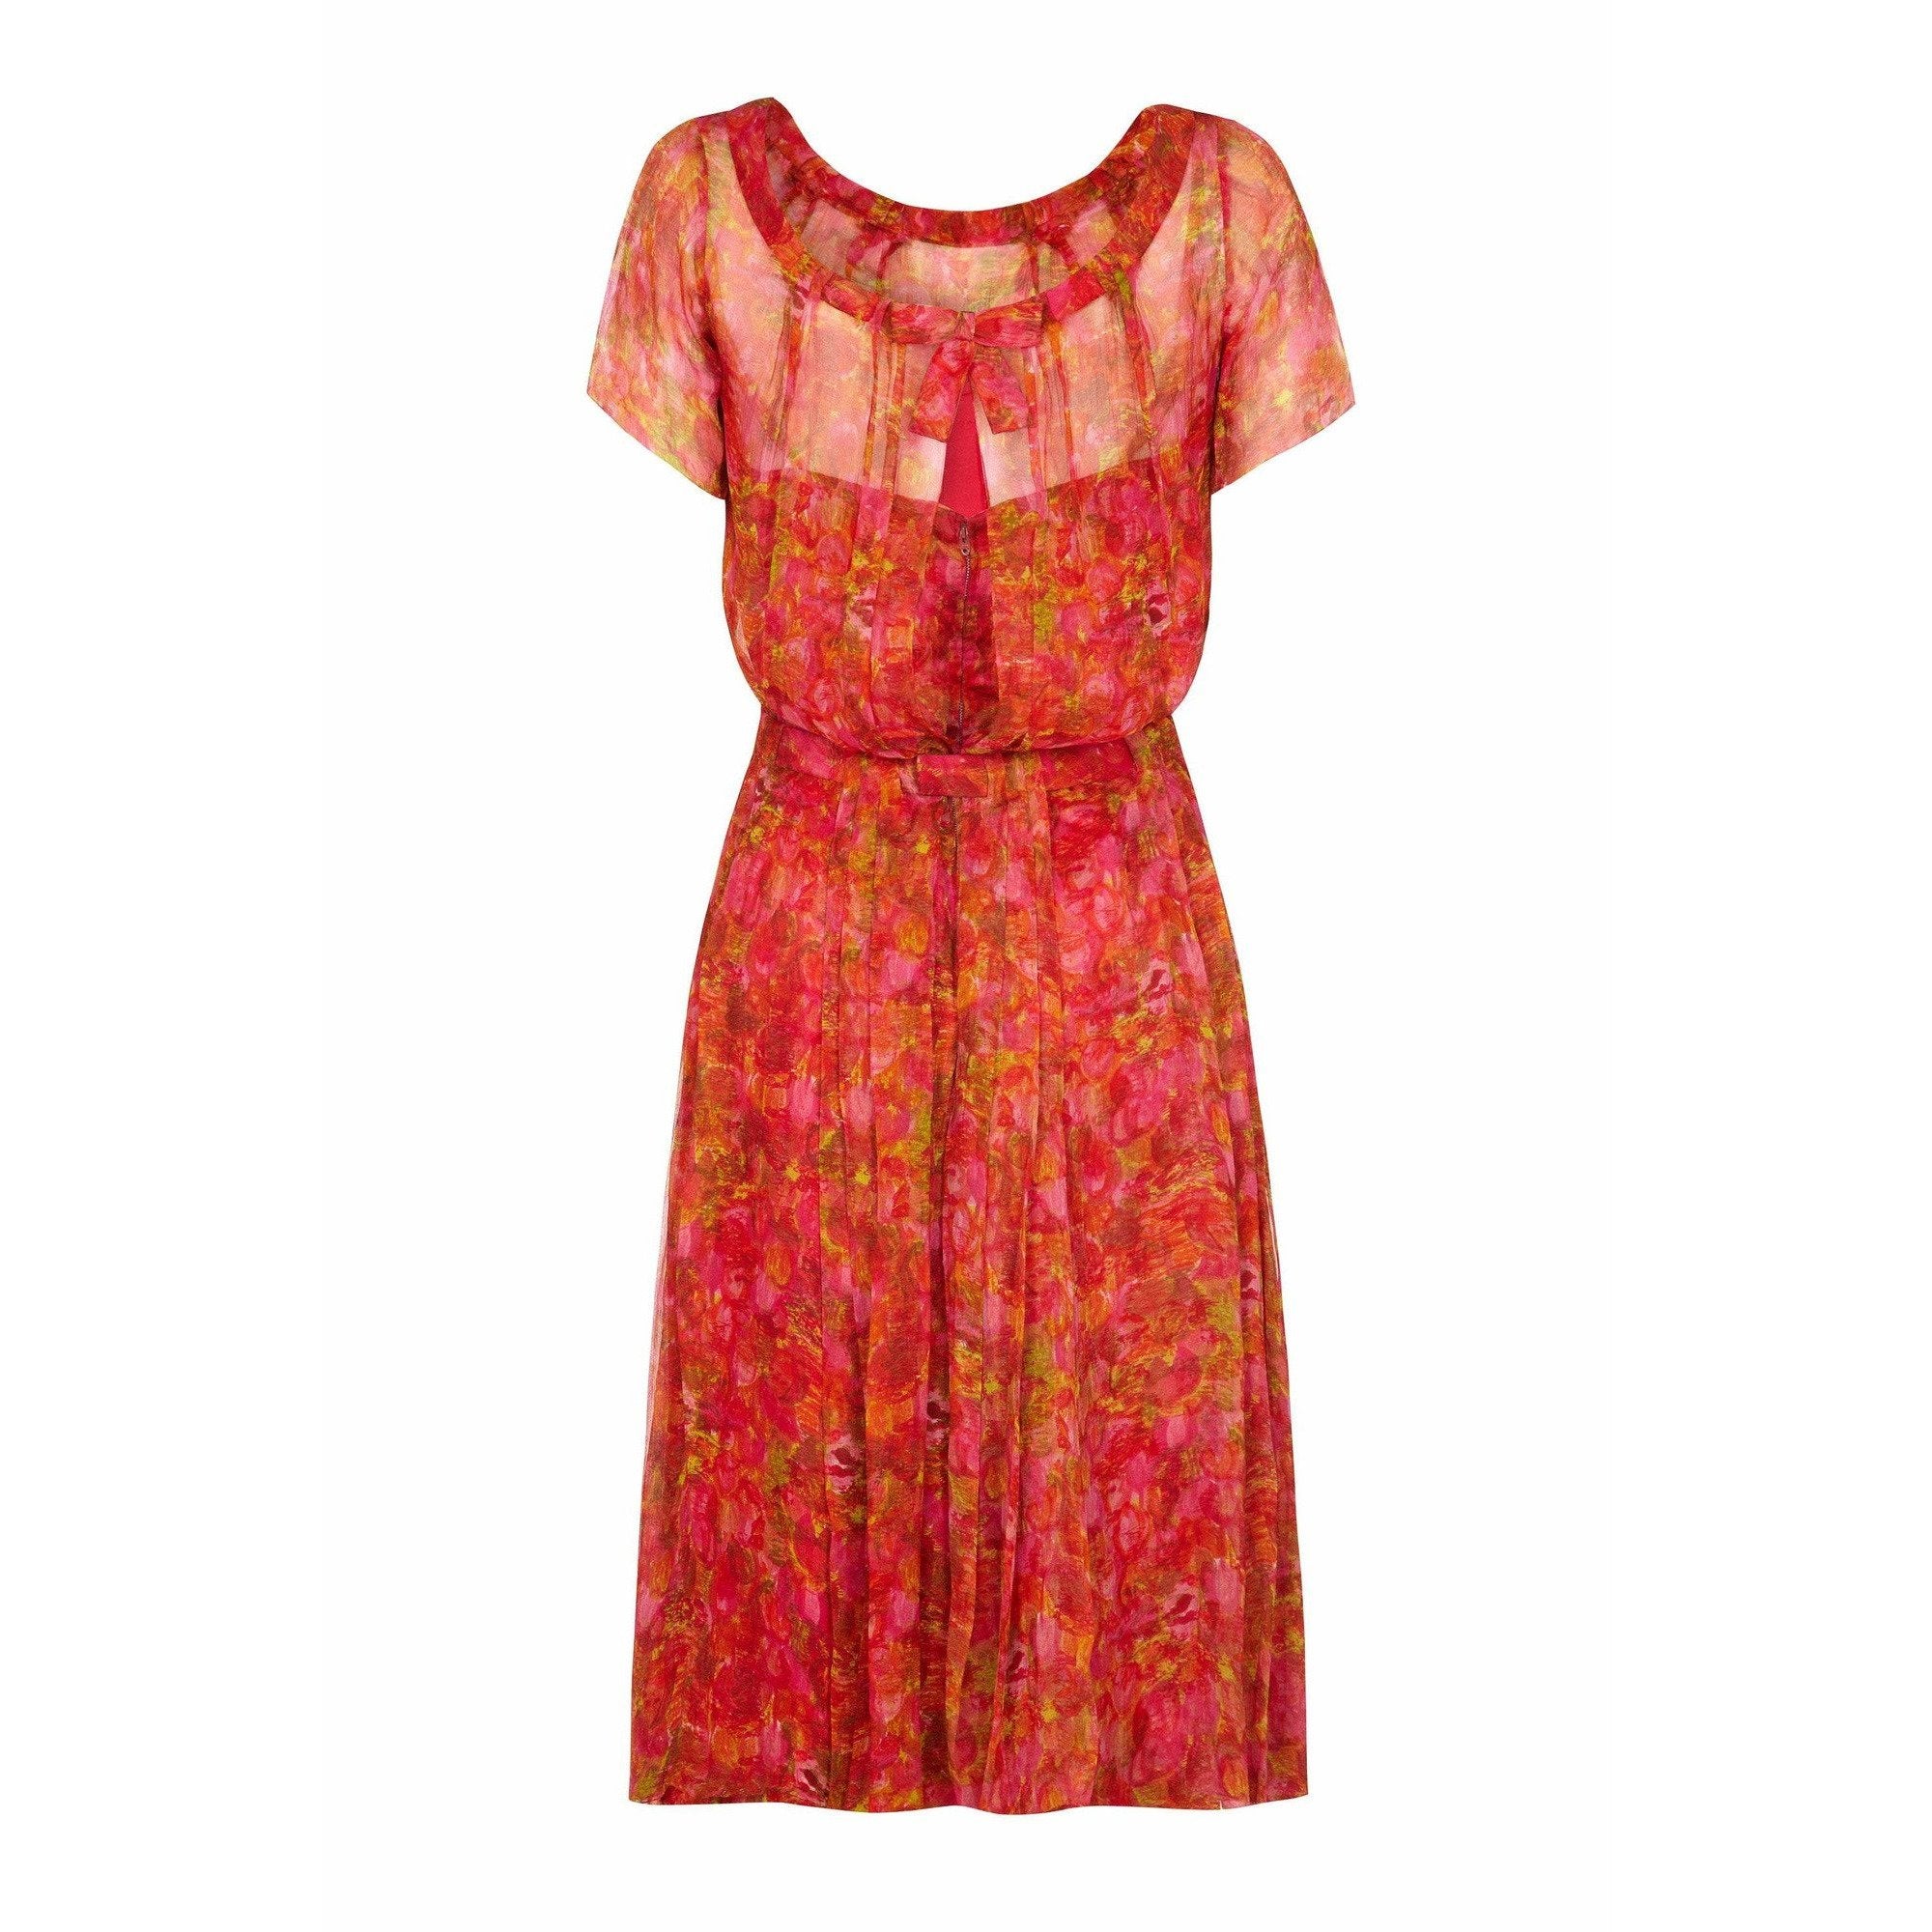 1950s Lachasse Couture Printed Silk Chiffon Dress With Belt Detail